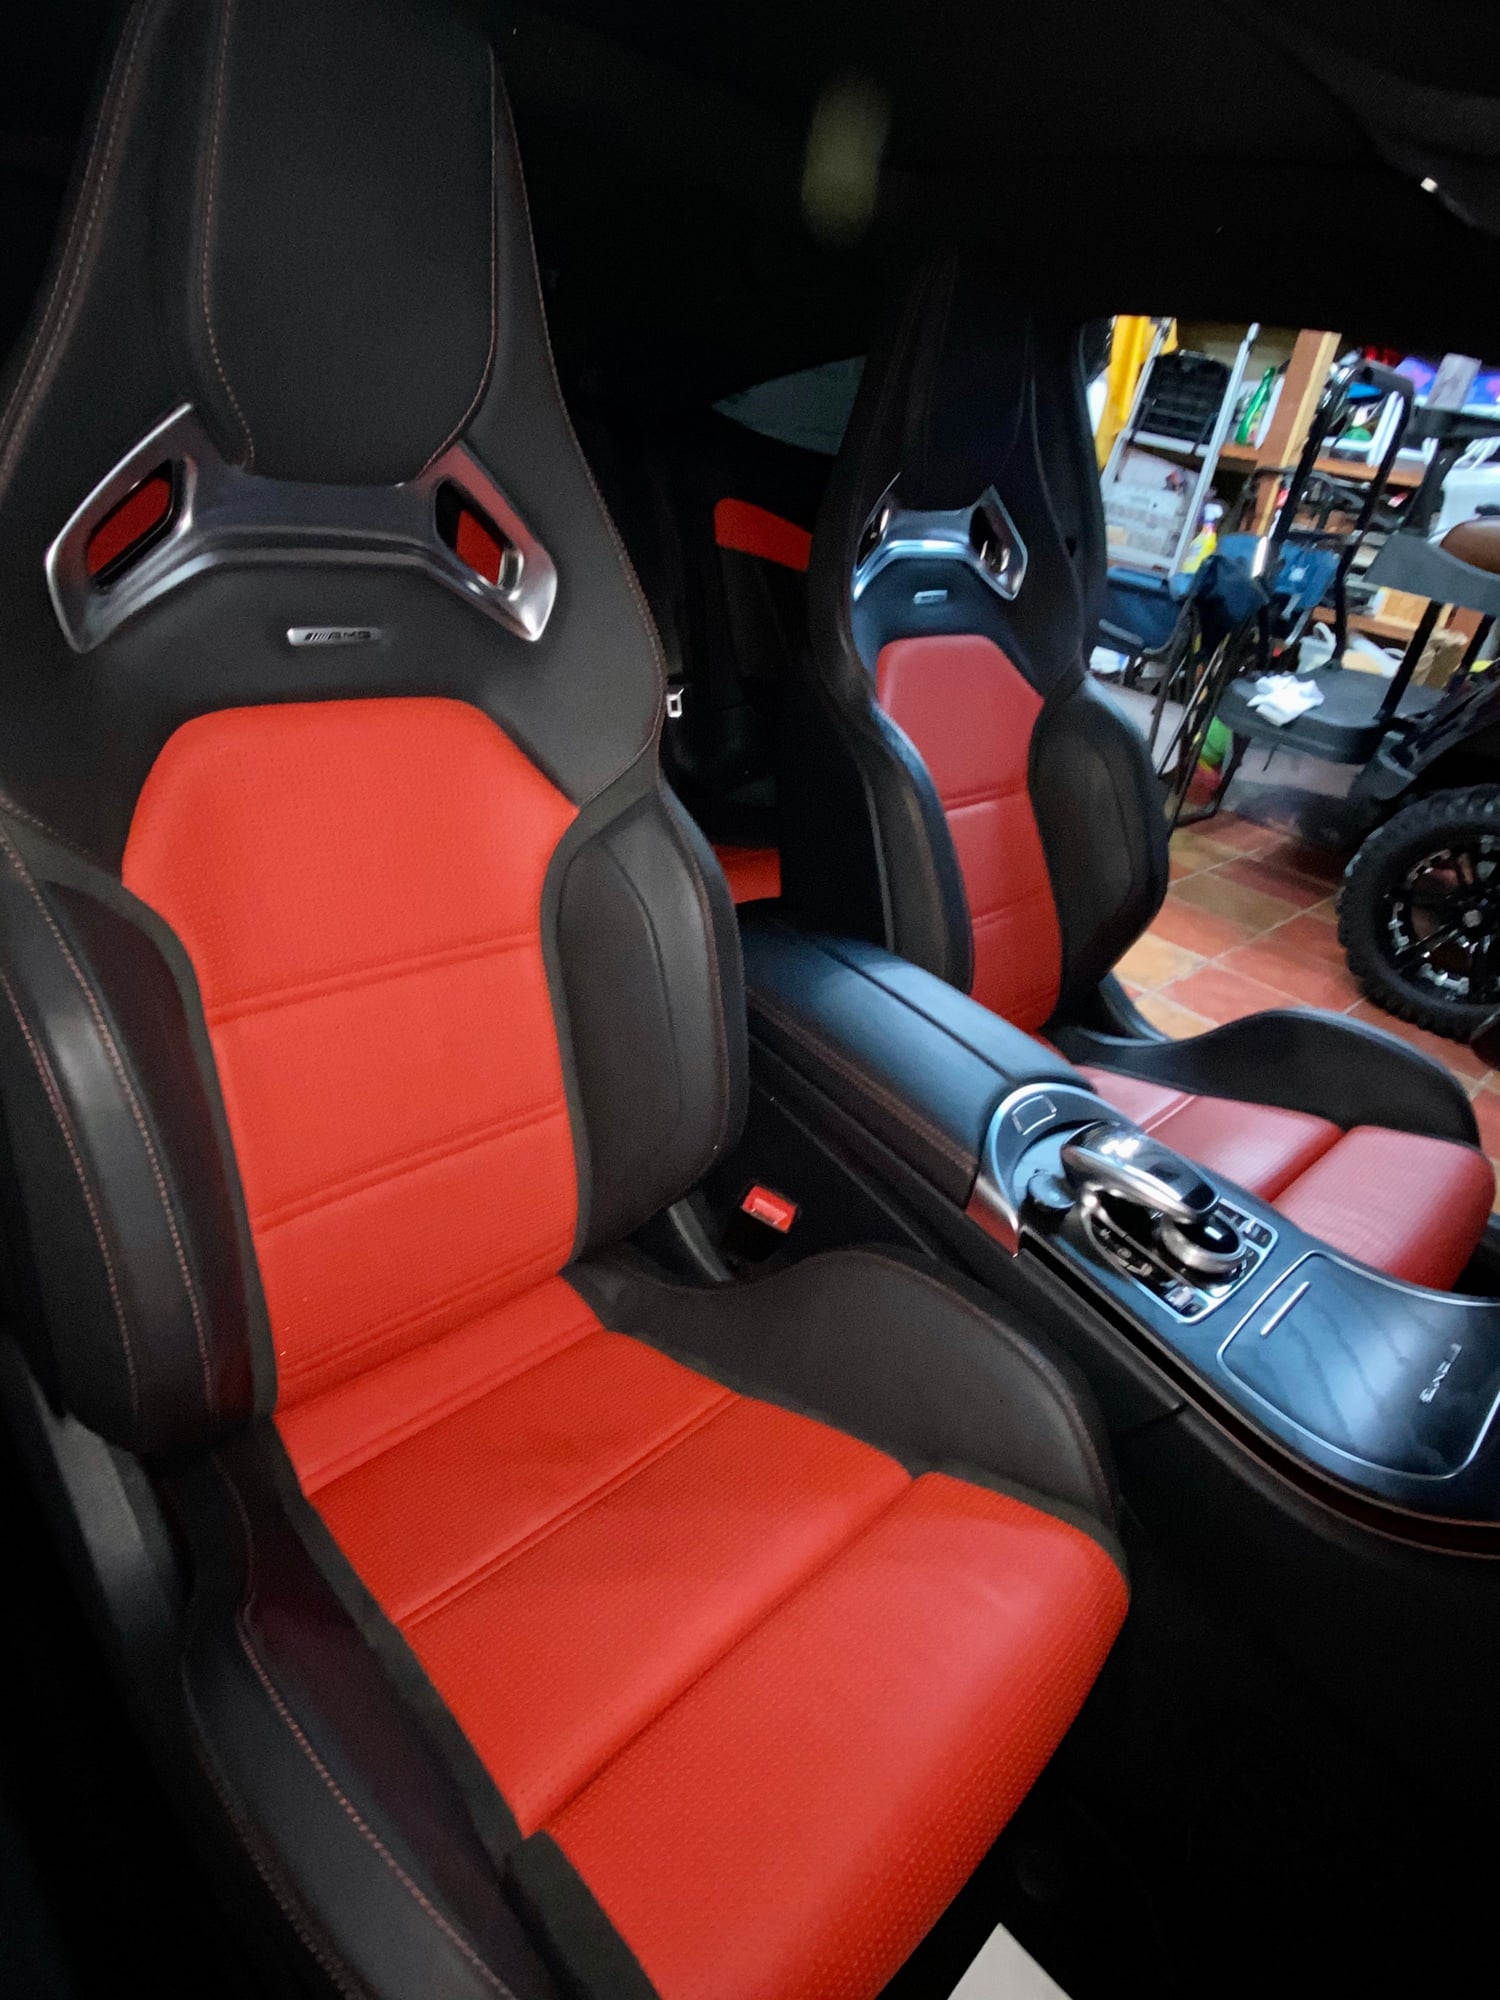 Interior/Upholstery - Parting out full interior AMG Performance Seats - Used - 2016 to 2020 Mercedes-Benz C63 AMG S - Miami, FL 33185, United States